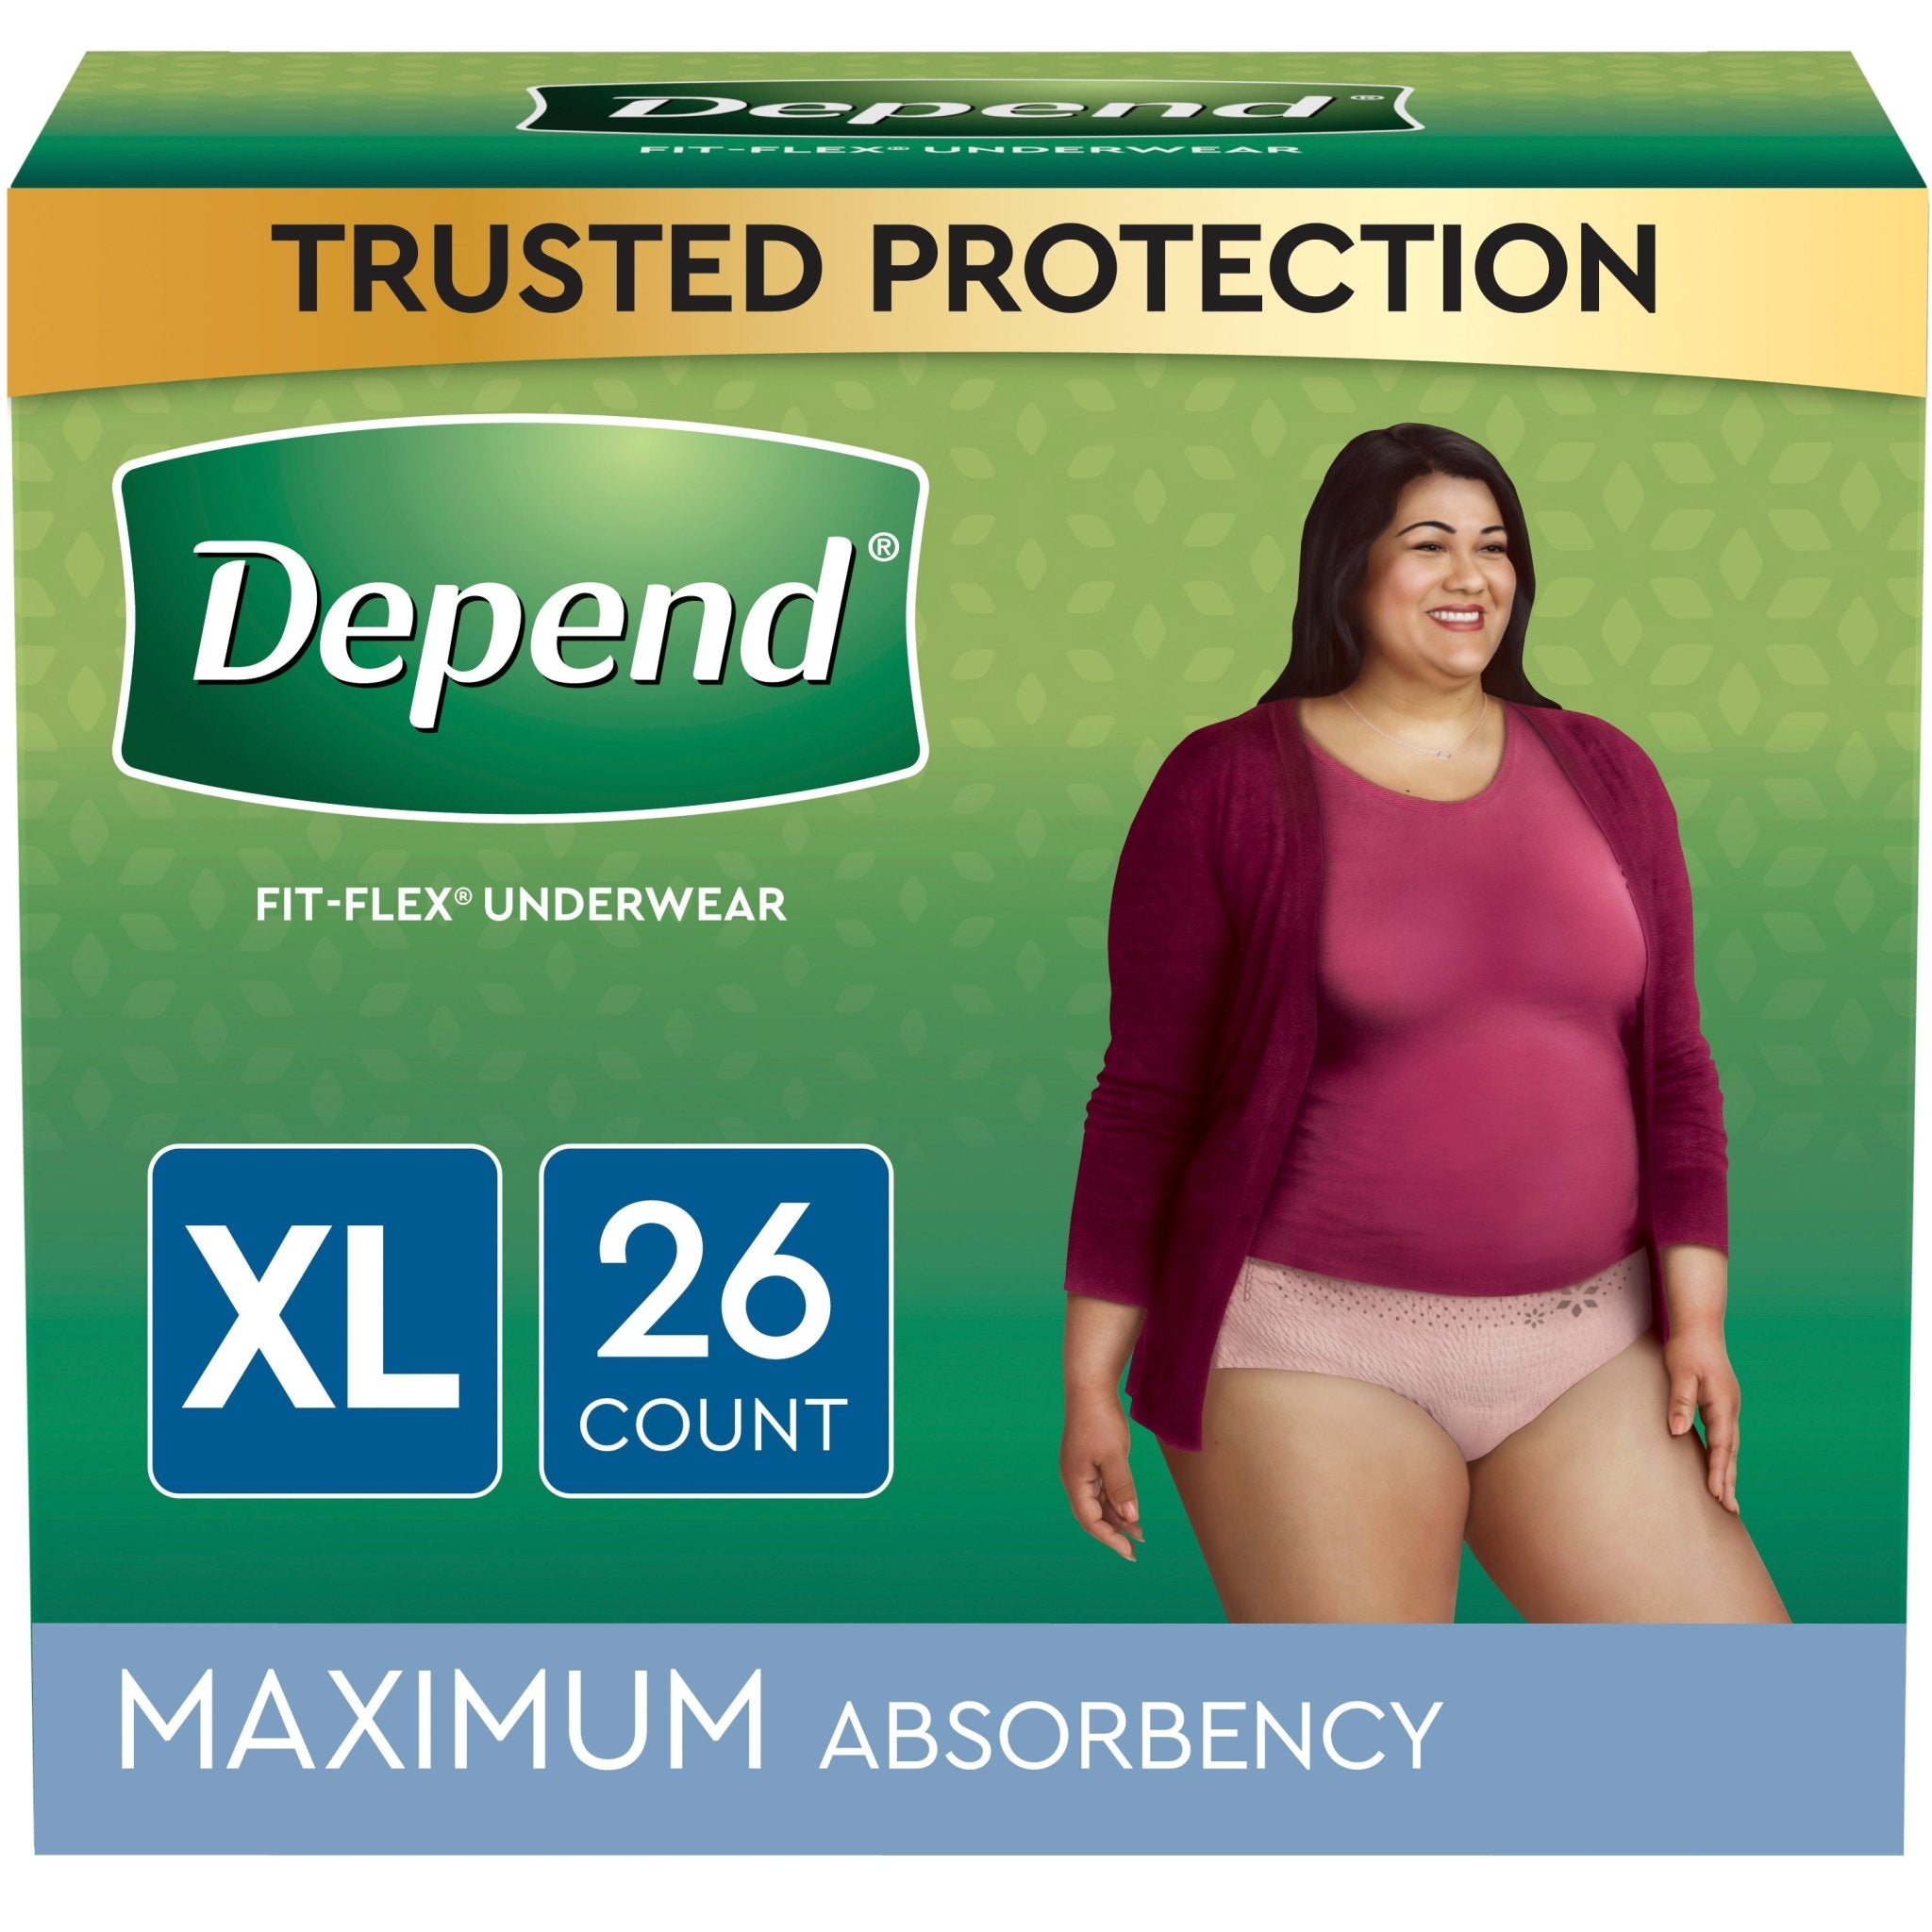 CA/52 - Depend FIT-FLEX Incontinence Underwear for Women, Maximum Absorbency, XL, Blush, 26 Count, Replaces Item 6913406 - Best Buy Medical Supplies